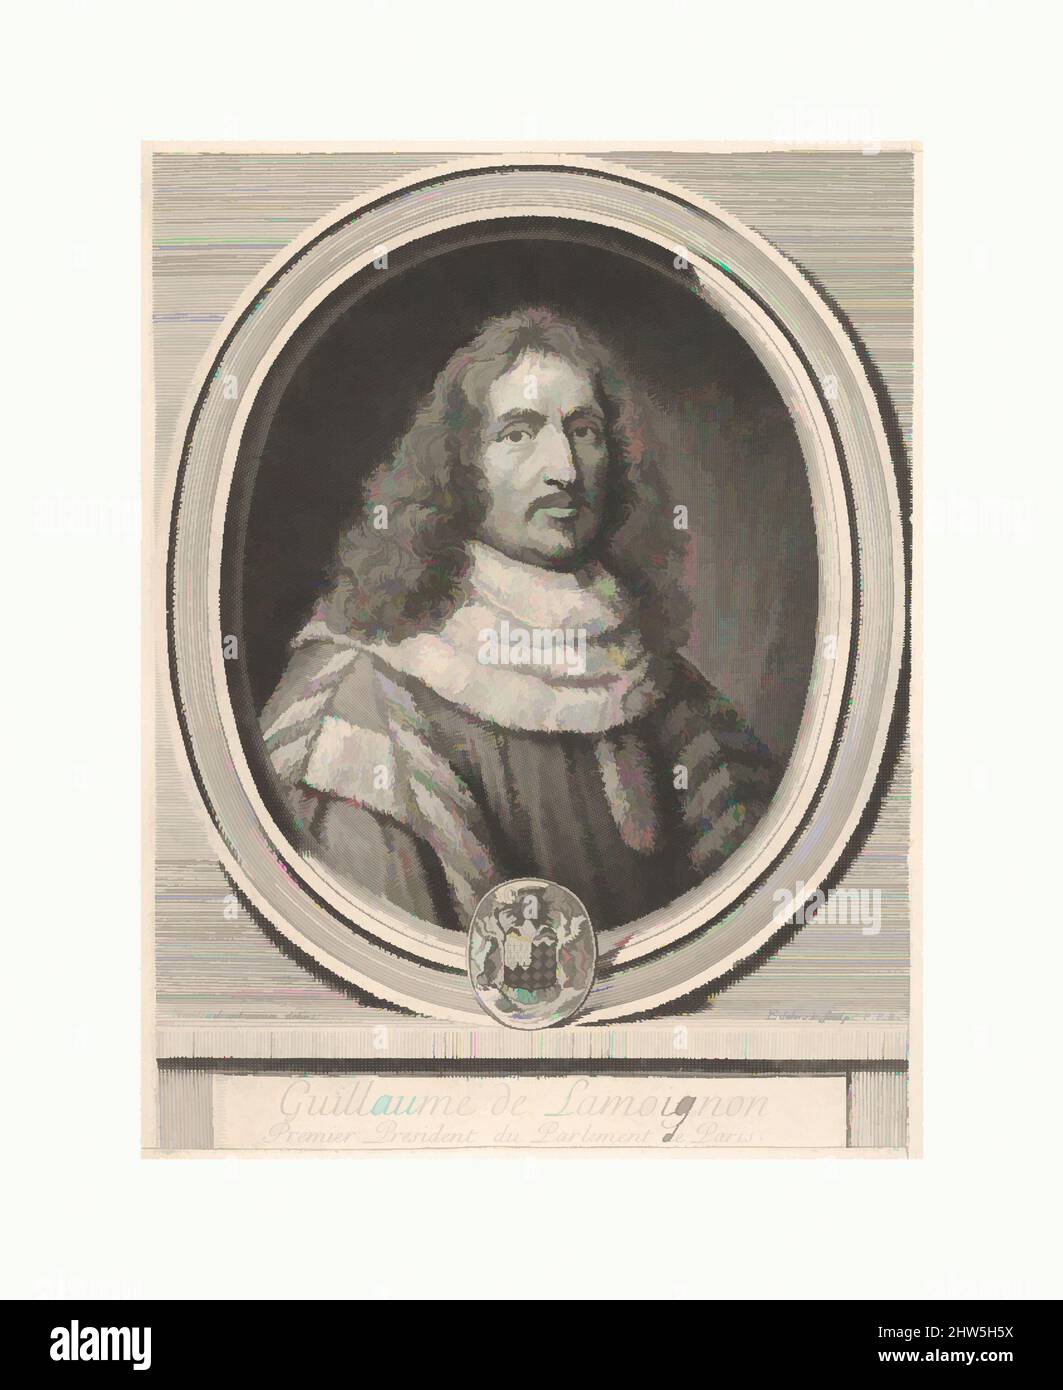 Art inspired by Guillaume de Lamoignon, 17th century, Engraving, sheet: 9 1/2 x 7 3/16 in. (24.2 x 18.3 cm), Prints, Gérard Edelinck (Dutch, Antwerp 1640–1707 Paris), After Robert Nanteuil (French, Reims 1623–1678 Paris, Classic works modernized by Artotop with a splash of modernity. Shapes, color and value, eye-catching visual impact on art. Emotions through freedom of artworks in a contemporary way. A timeless message pursuing a wildly creative new direction. Artists turning to the digital medium and creating the Artotop NFT Stock Photo